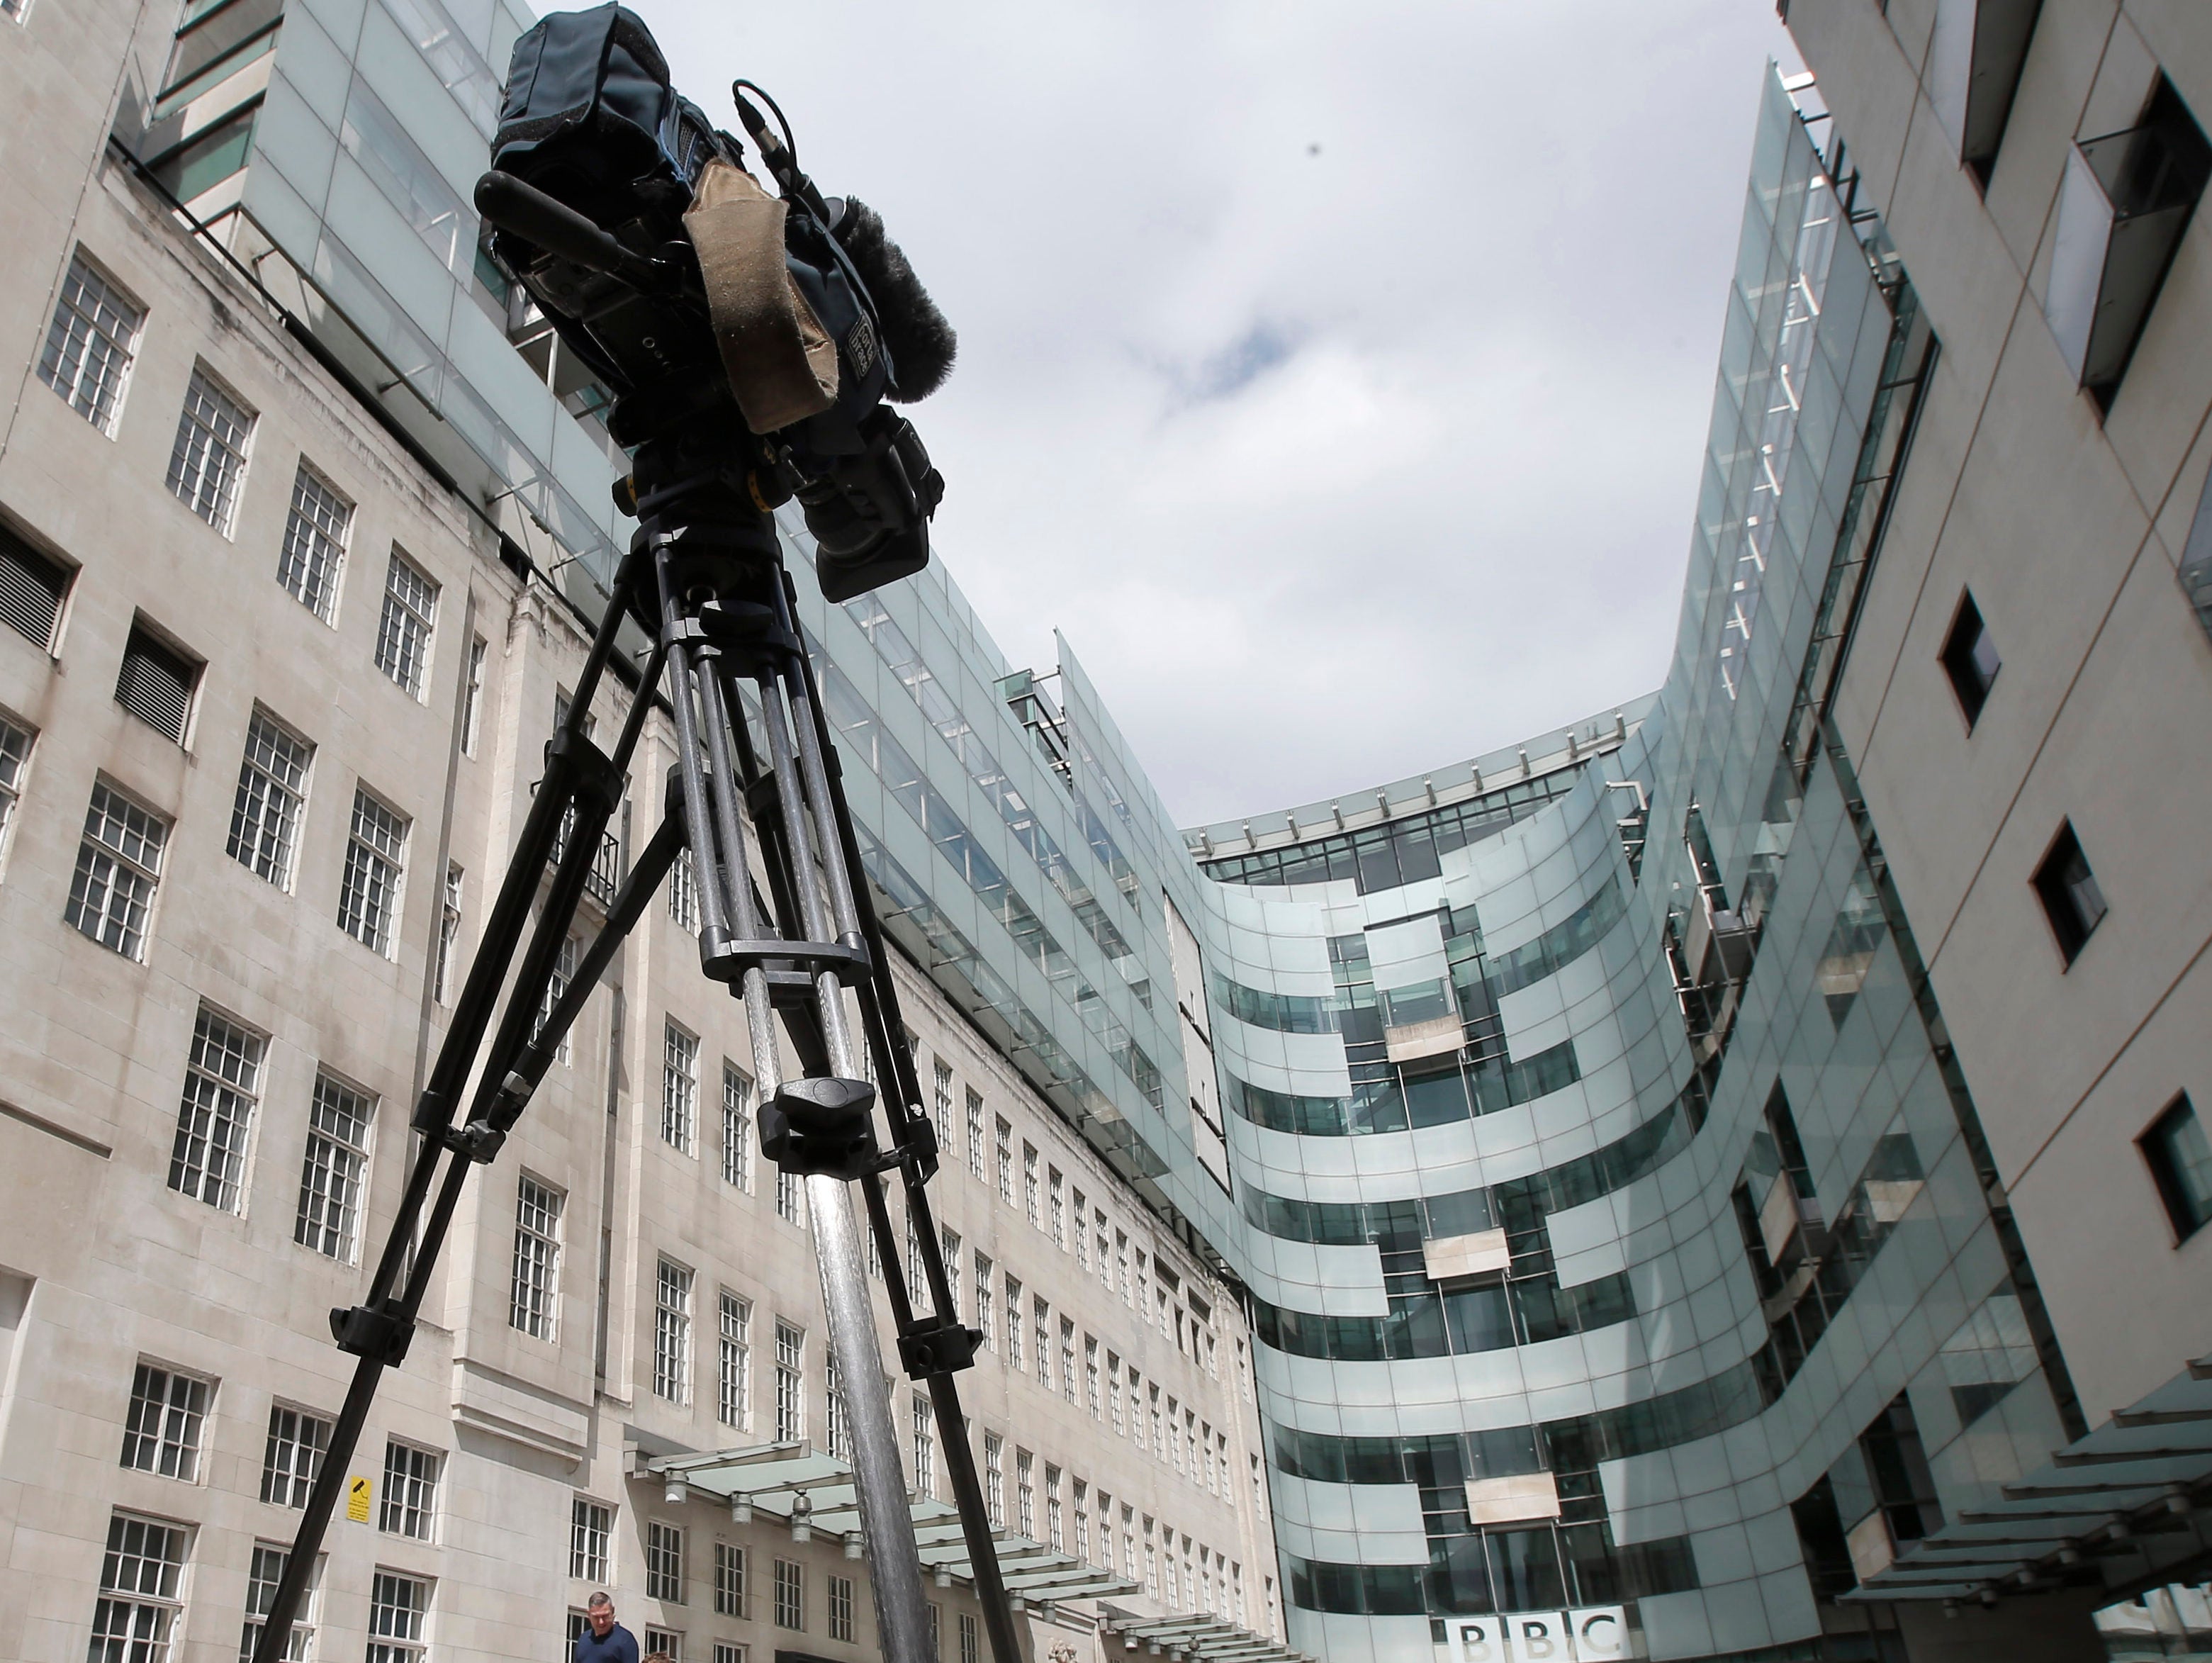 Tax, rather than adverts or subscriptions, should fund BBC says House of Lords